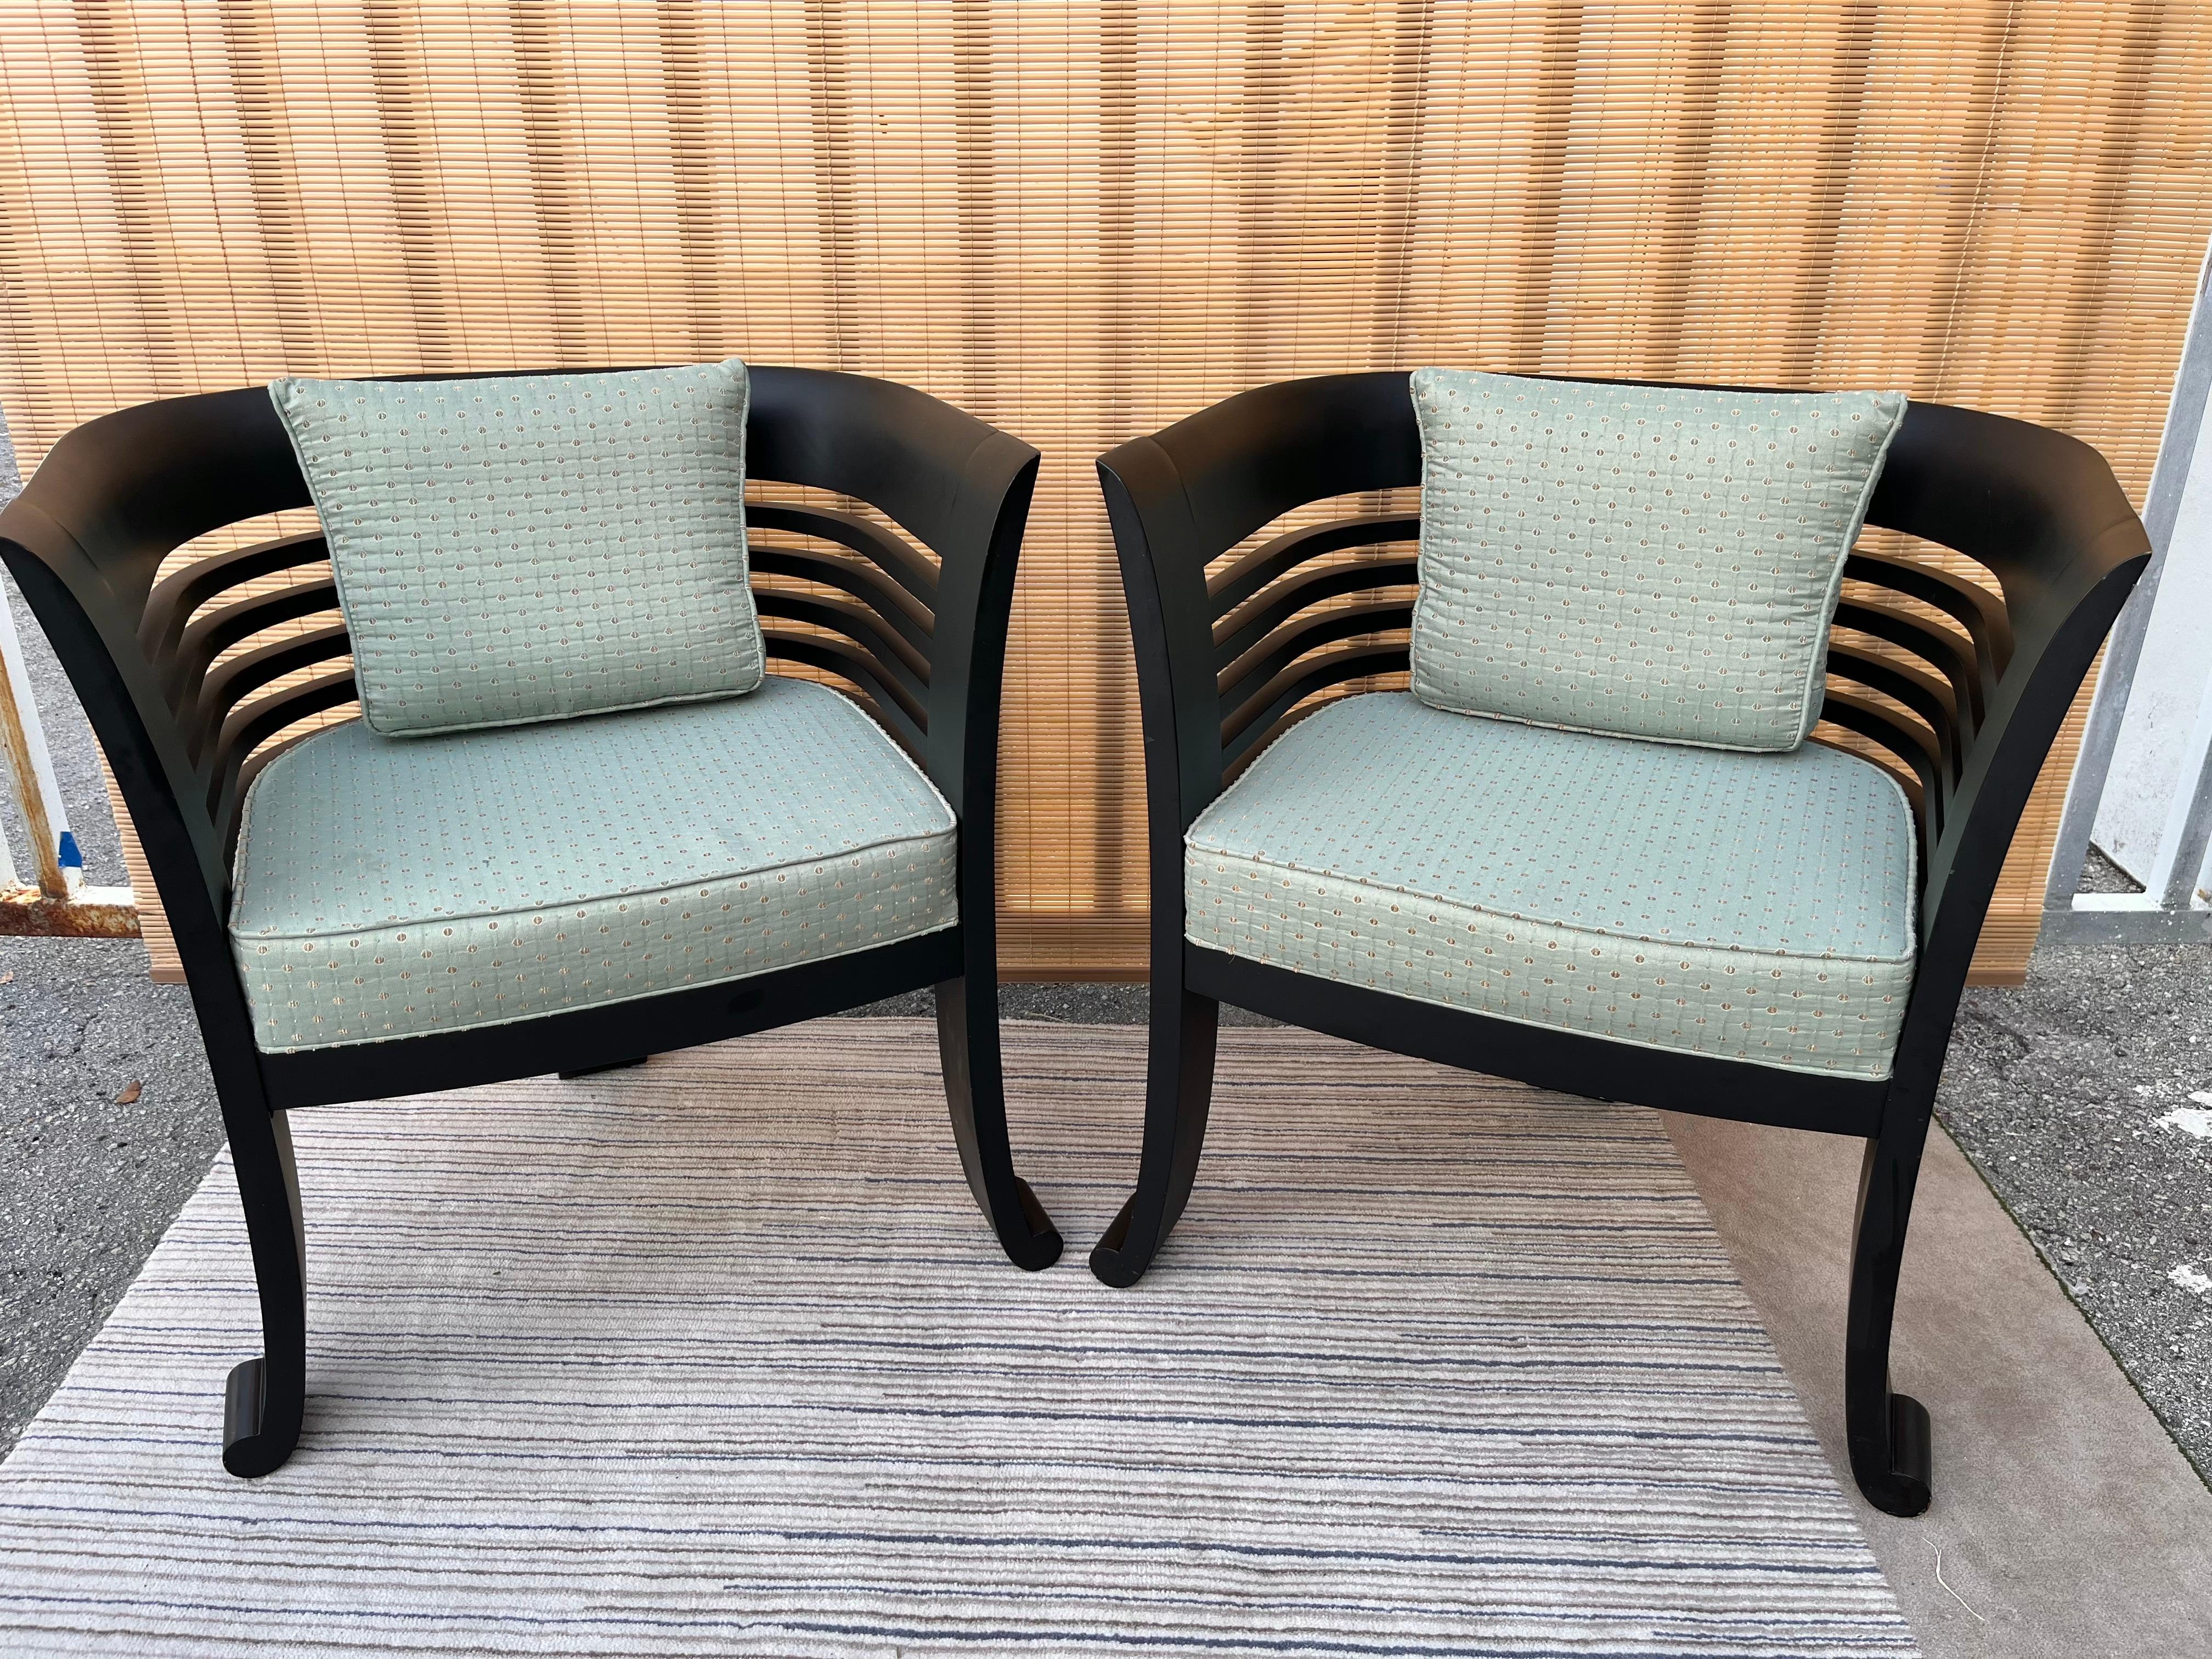 A Pair of Early 21st Century Lounge Three Leg Chairs by Westlake Furniture Chicago. Dated year 2000 
Feature a Chinoiserie inspired style with tree legs and rounded backrest. 
In excellent condition with very minor signs of wear consistent with age